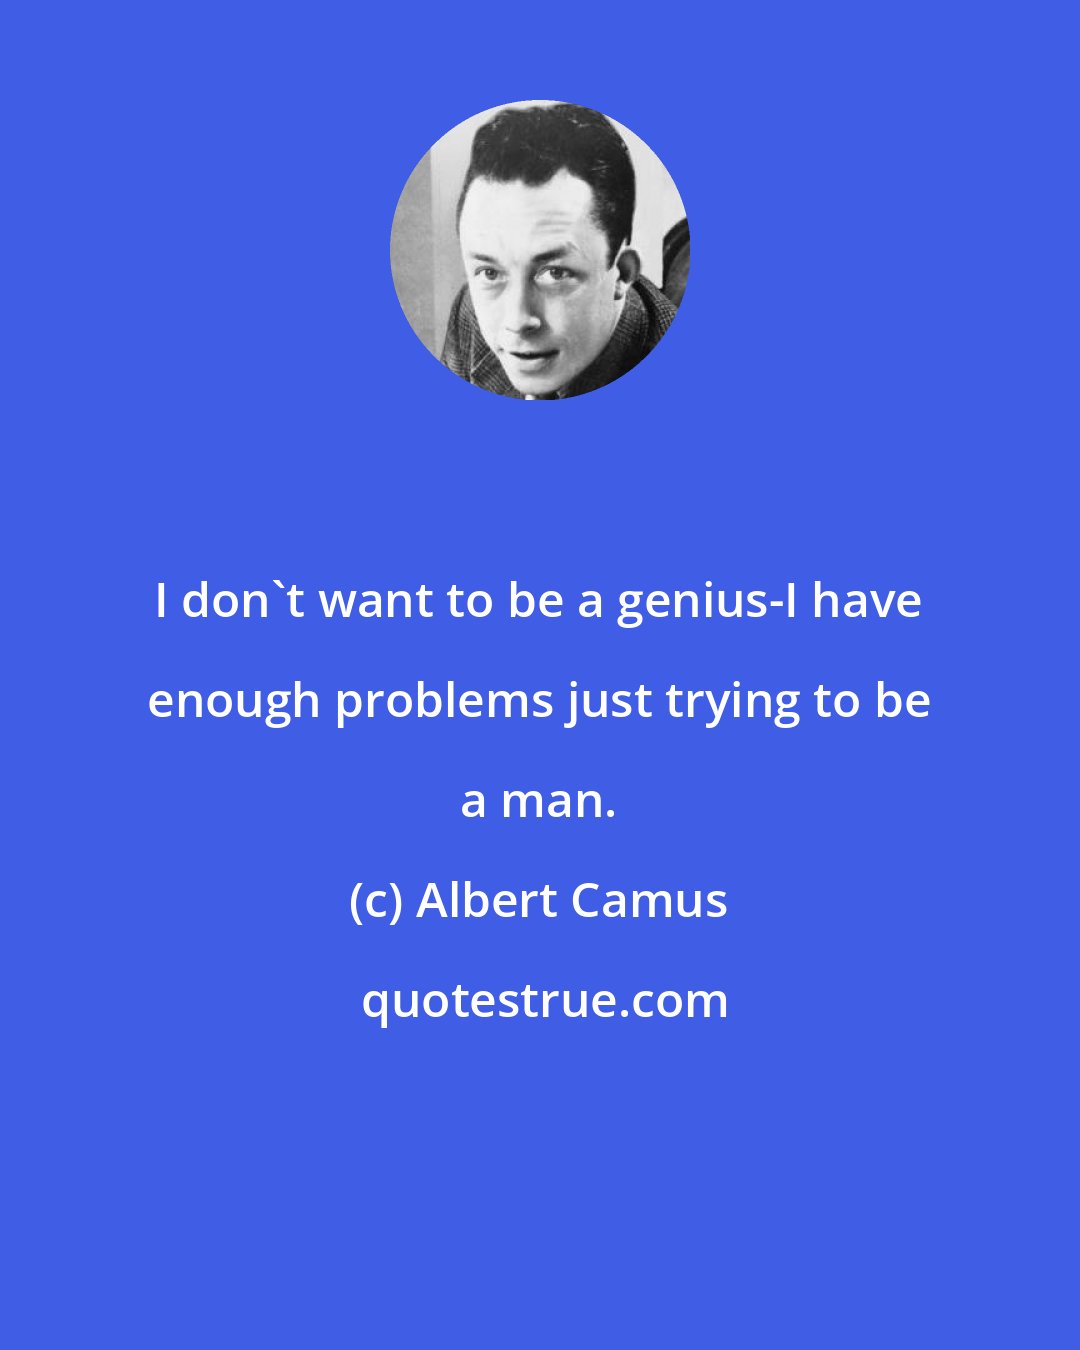 Albert Camus: I don't want to be a genius-I have enough problems just trying to be a man.